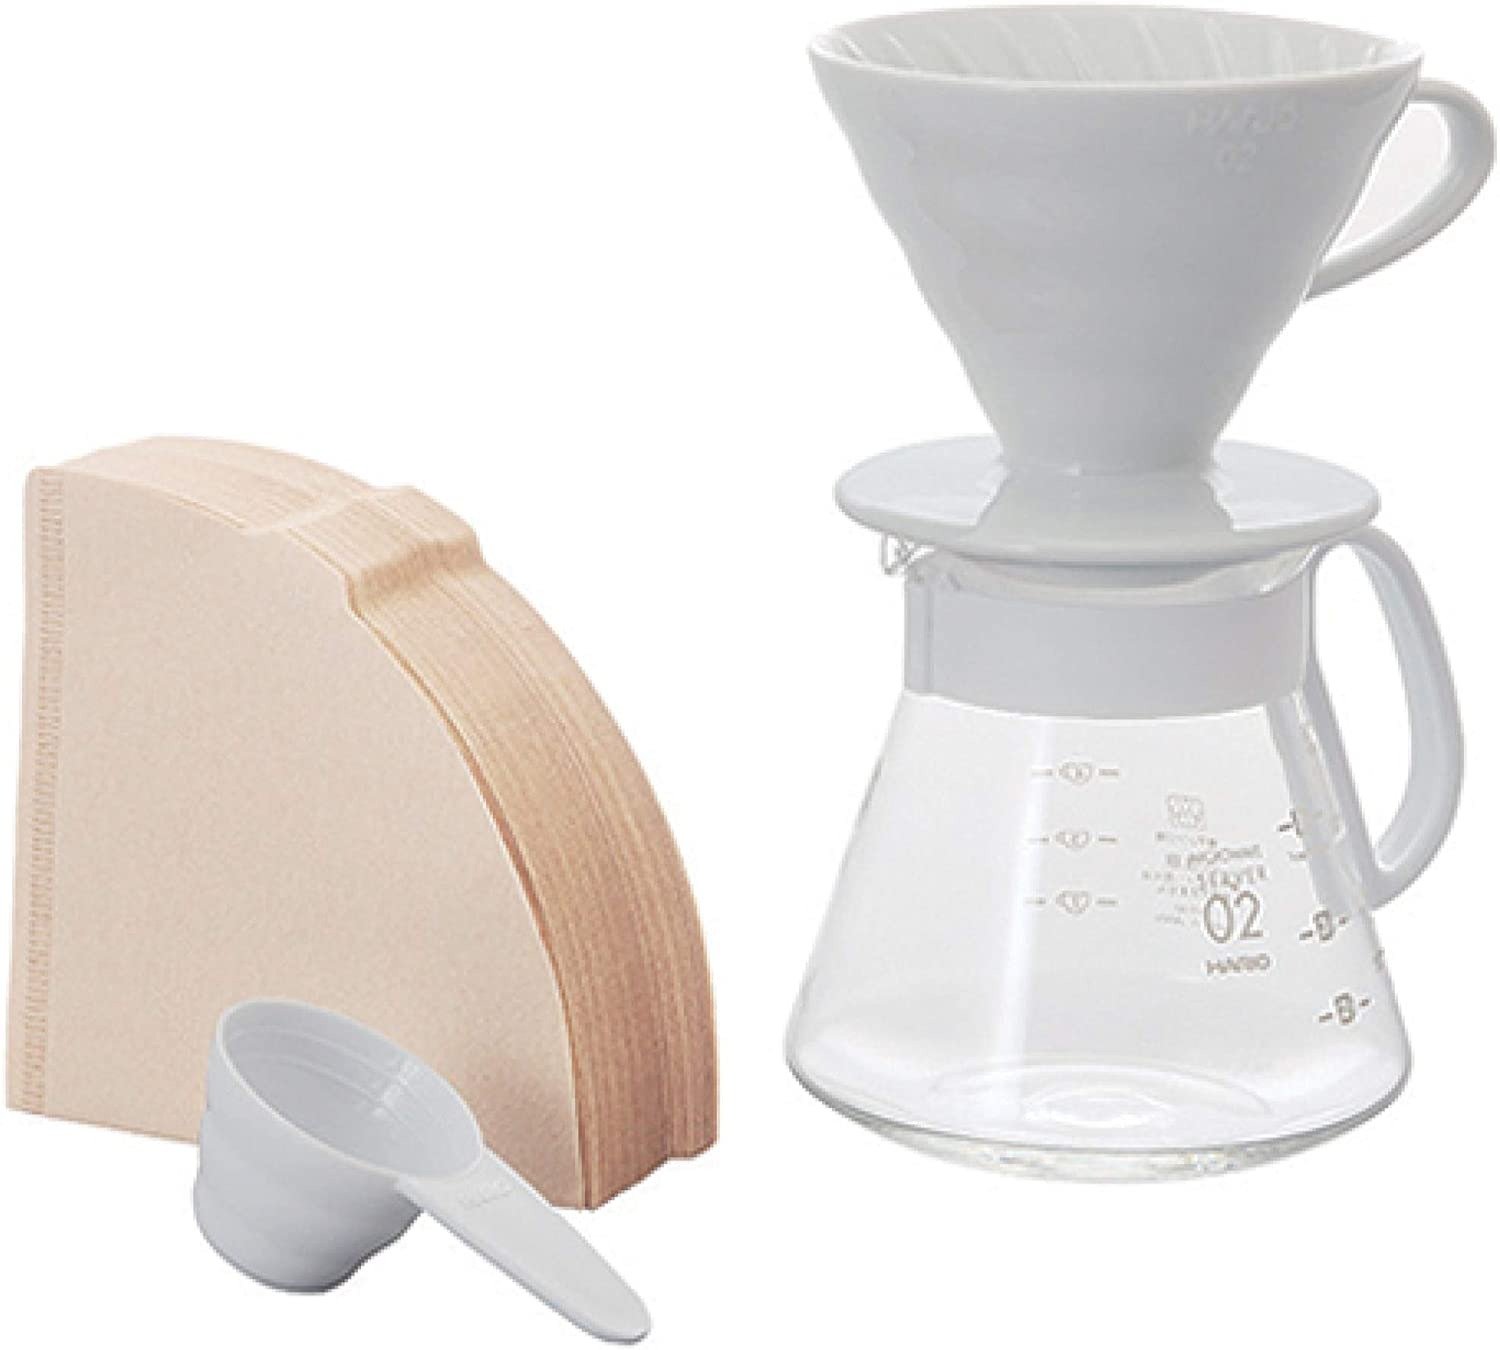 Coffee V60 Ceramic Pour Over Not Hario Coffee Dripper Cone Size 1-4cups 